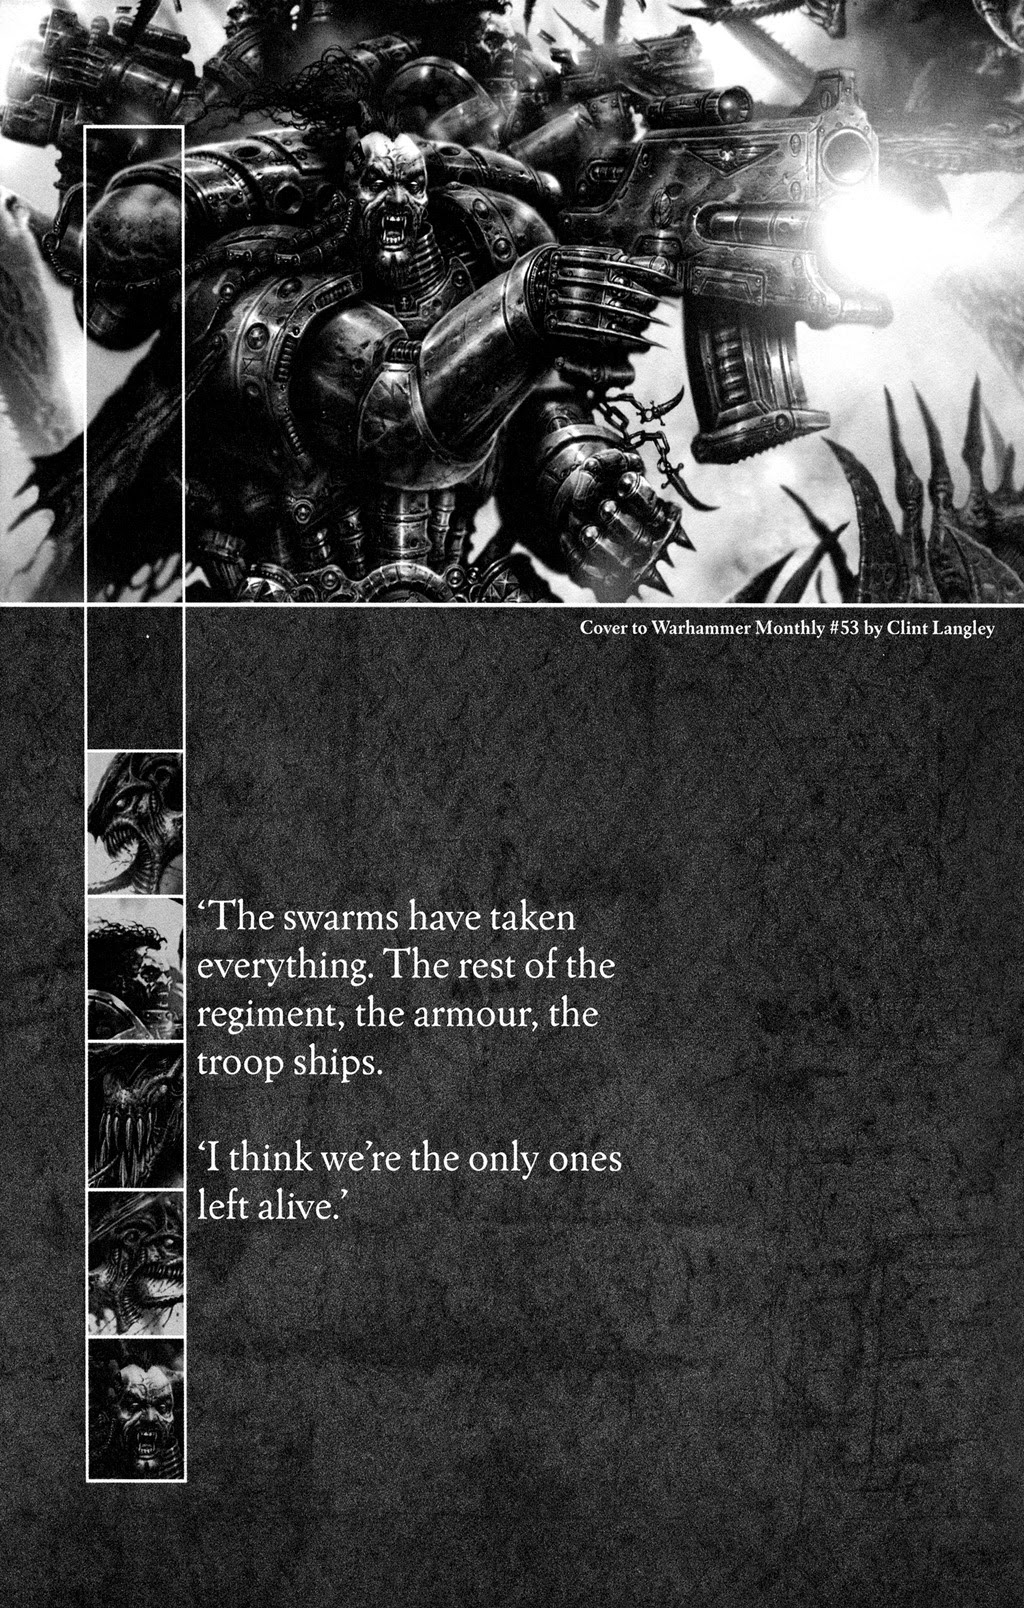 Read online Warhammer 40,000: Lone Wolves comic -  Issue # TPB - 17